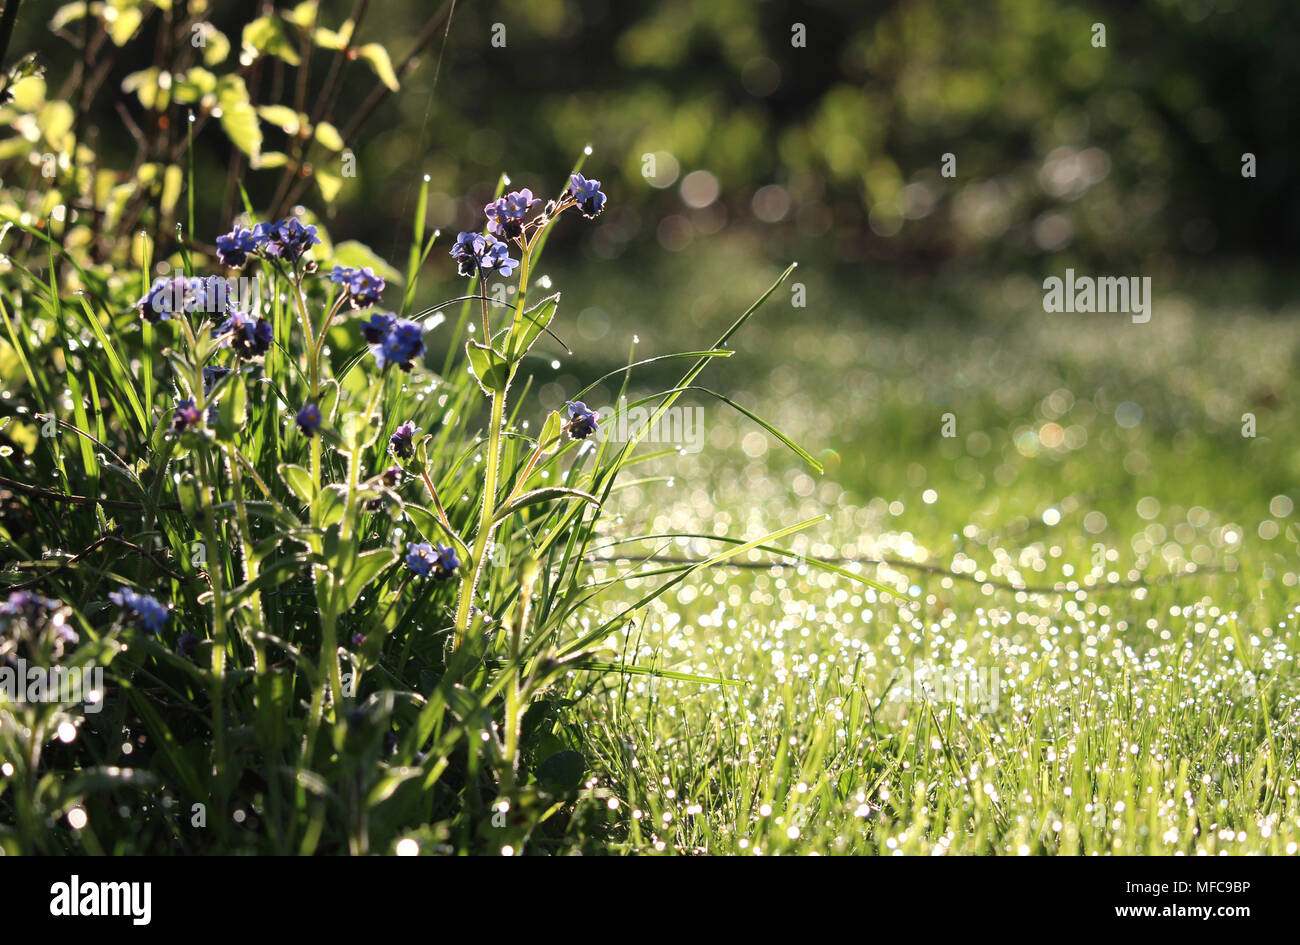 Beautiful early morning in a sunlit wild flower meadow in the spring. With forget me not flowers and dewy grass. Stock Photo